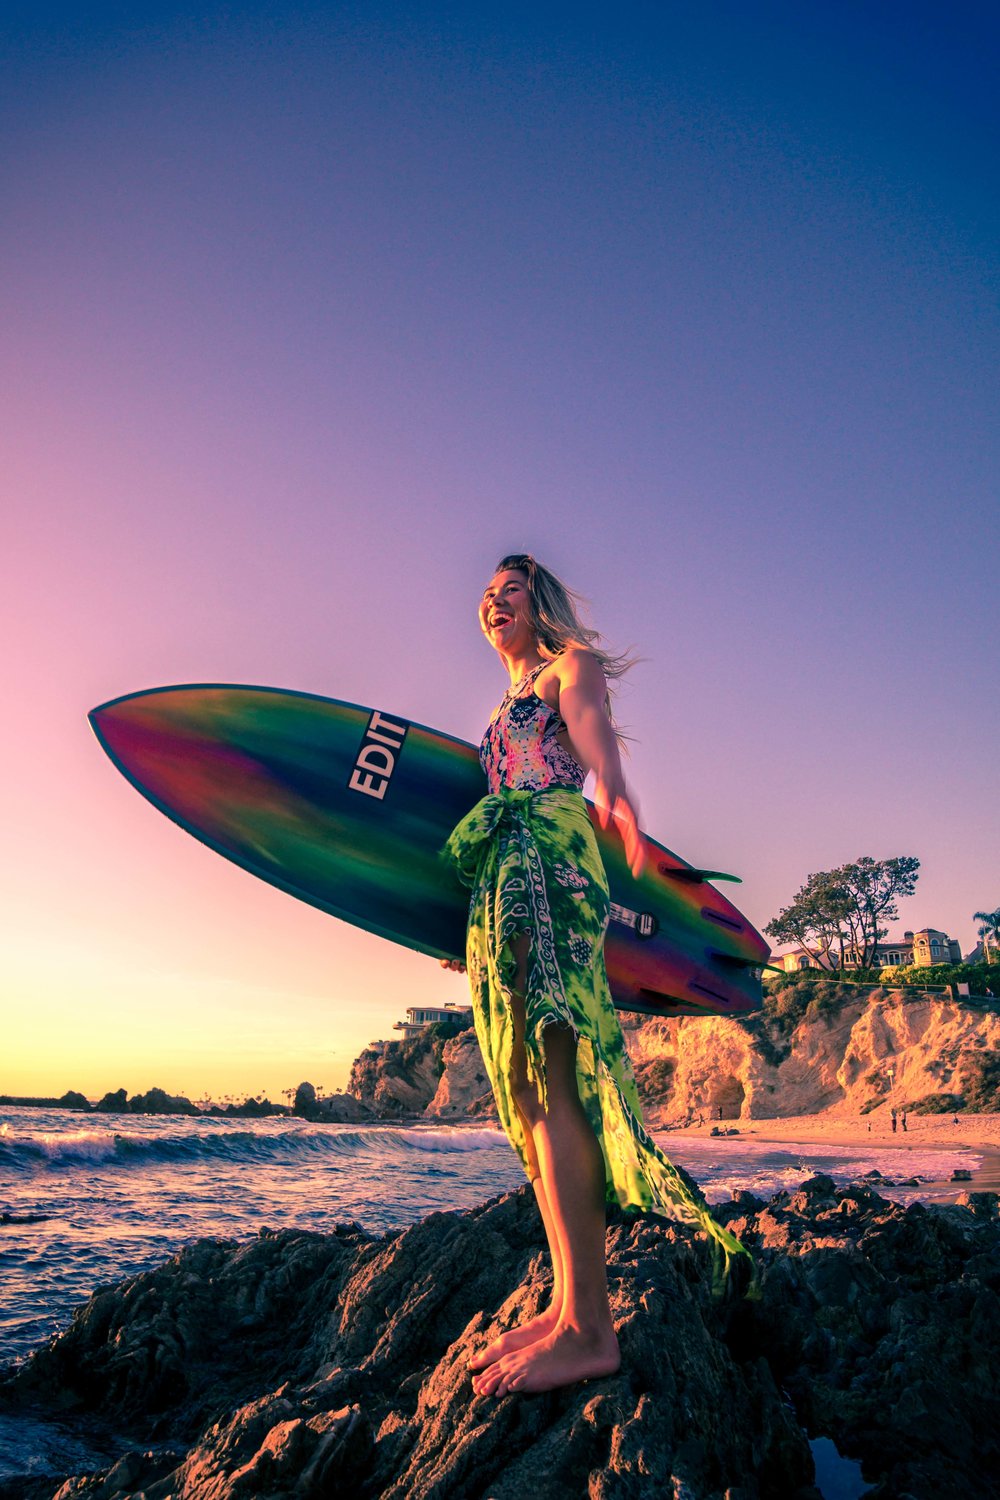 Portrait of a surfer girl with her vibrant attire and hand painted surfboard at the little corona beach